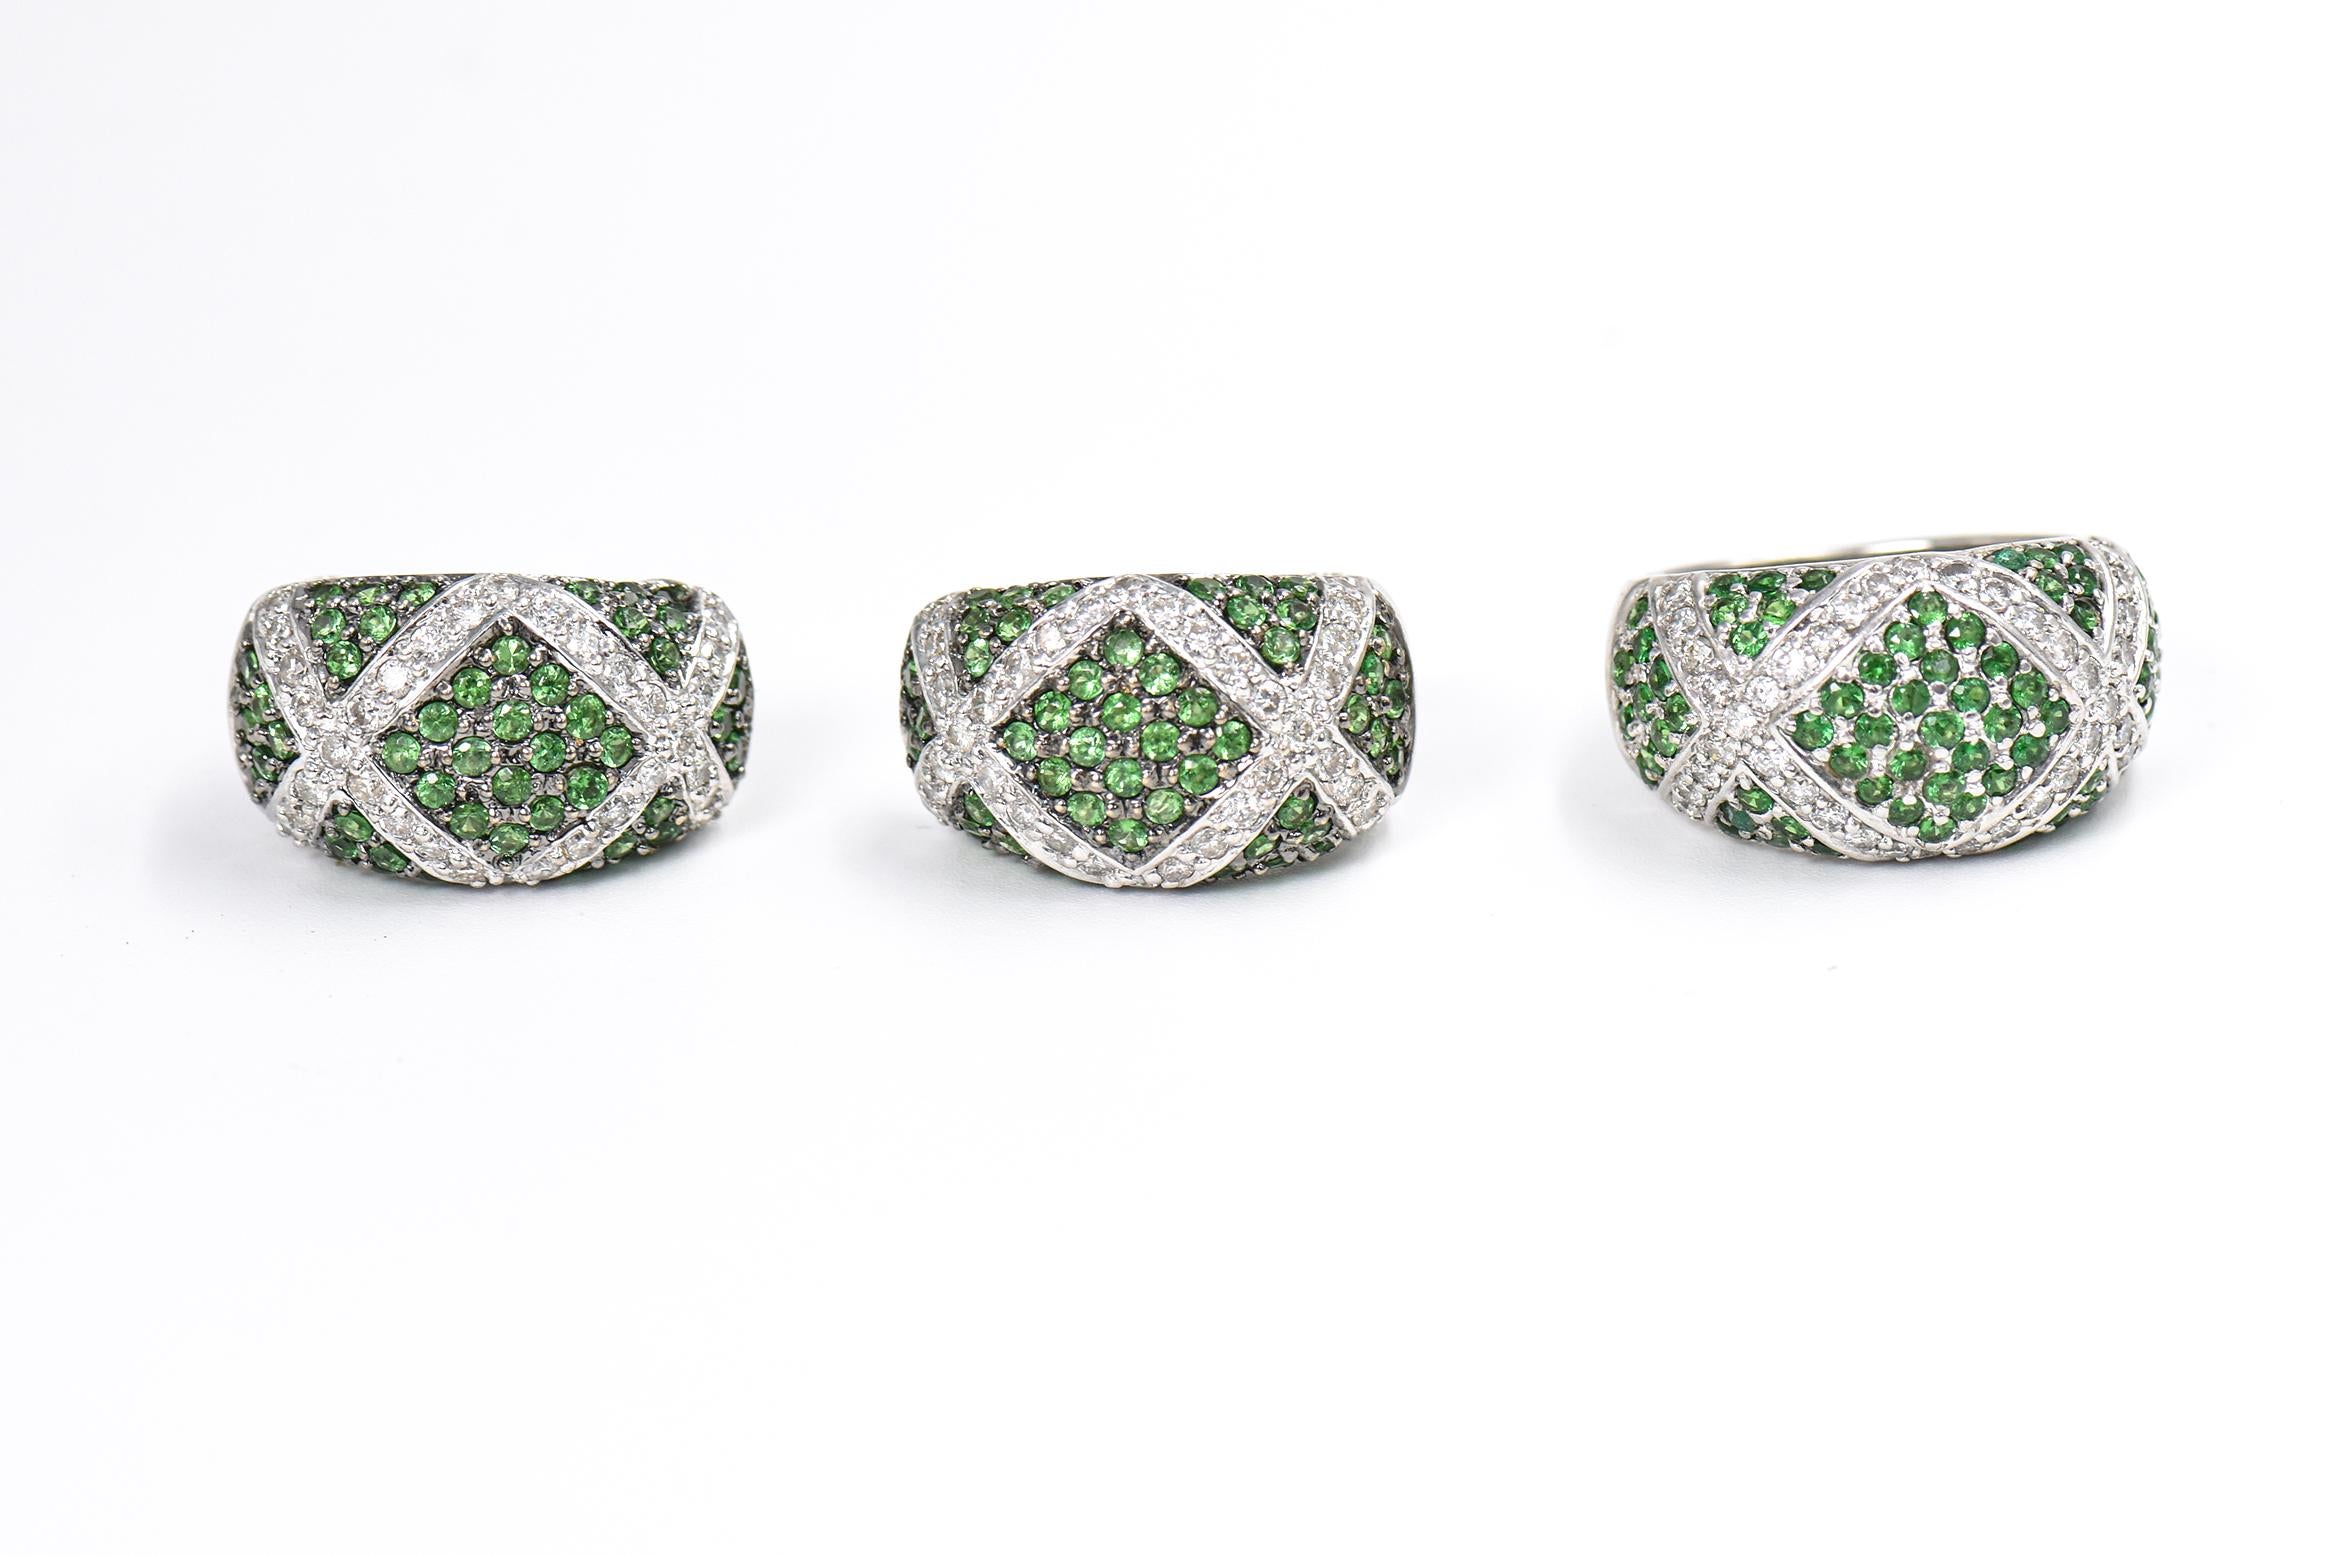 18k White gold, diamond and tsavorite garnet dome ring and earrings set.  Each of the band style ring and matching earrings have a criss-cross pattern that features sections of bead set round green tsavorite garnets highlighted by 